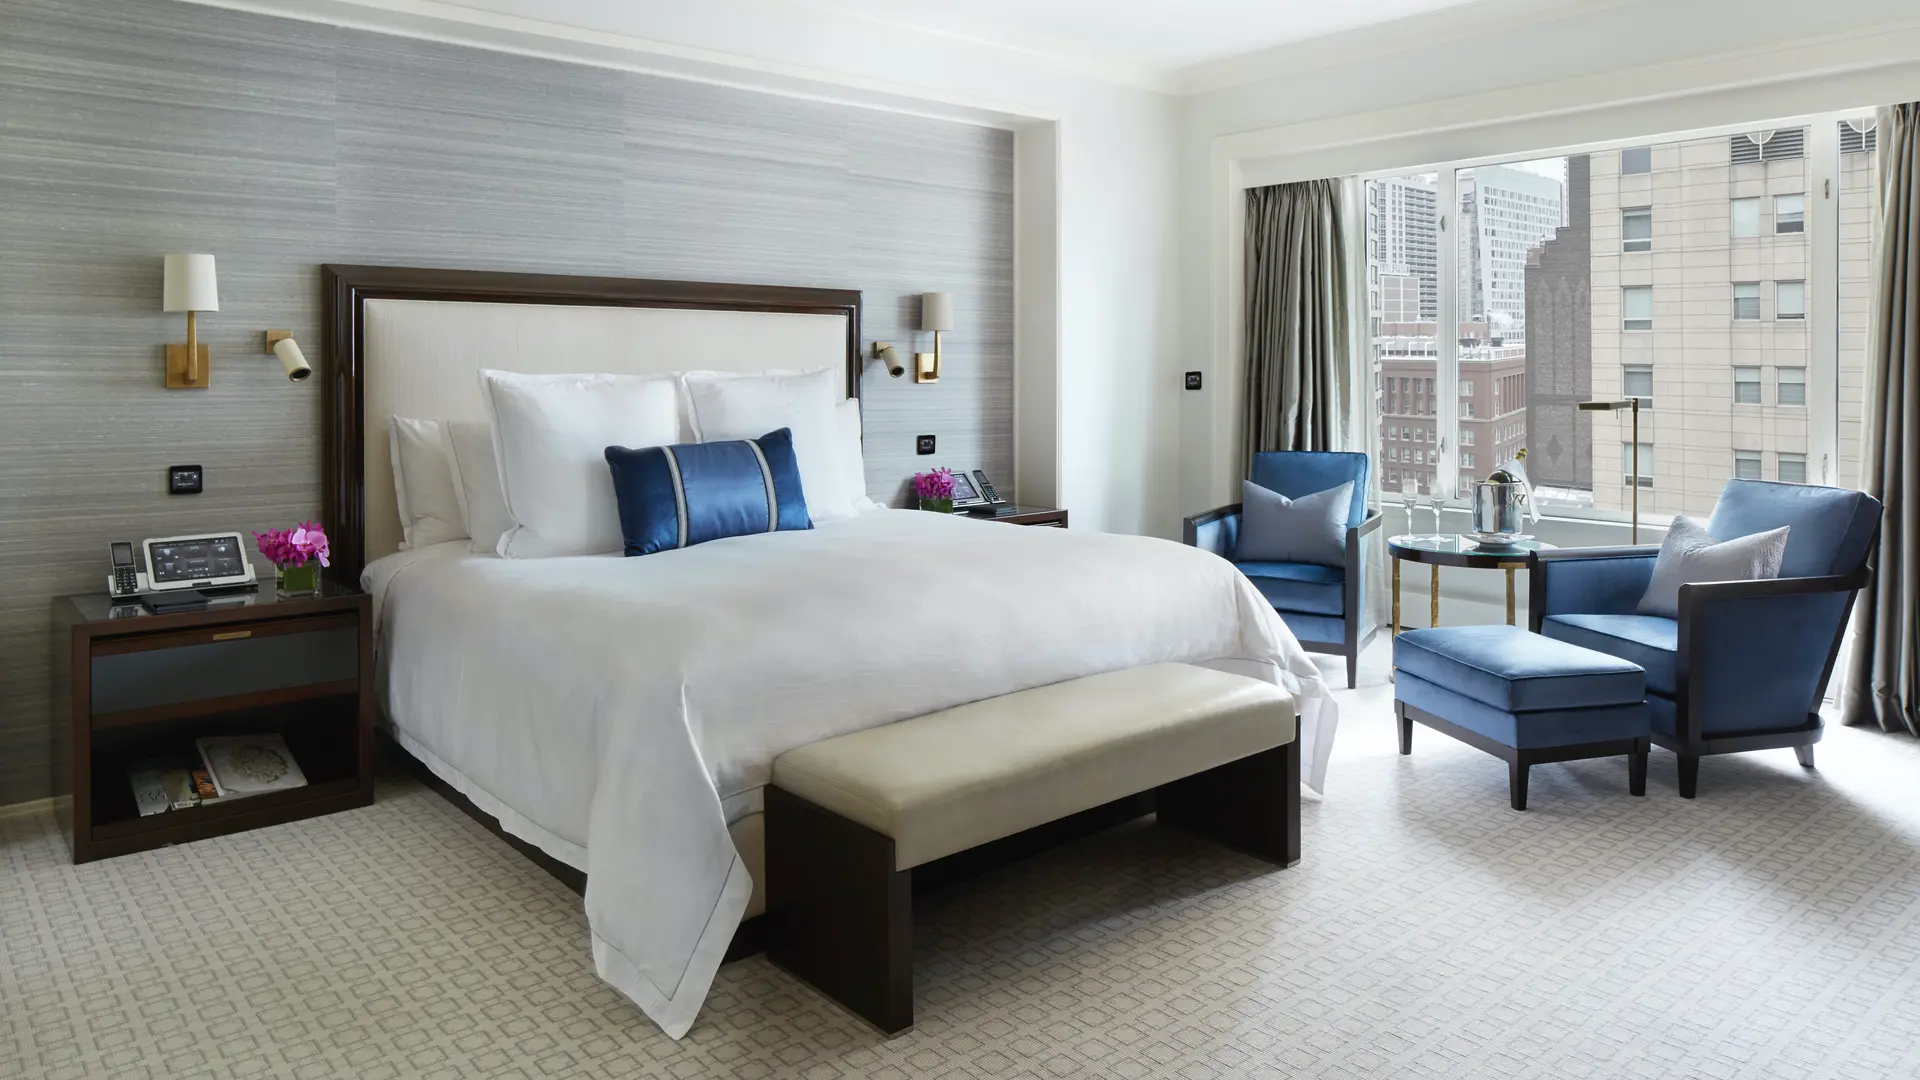 Hotel review Accommodation' - The Peninsula Chicago - 0